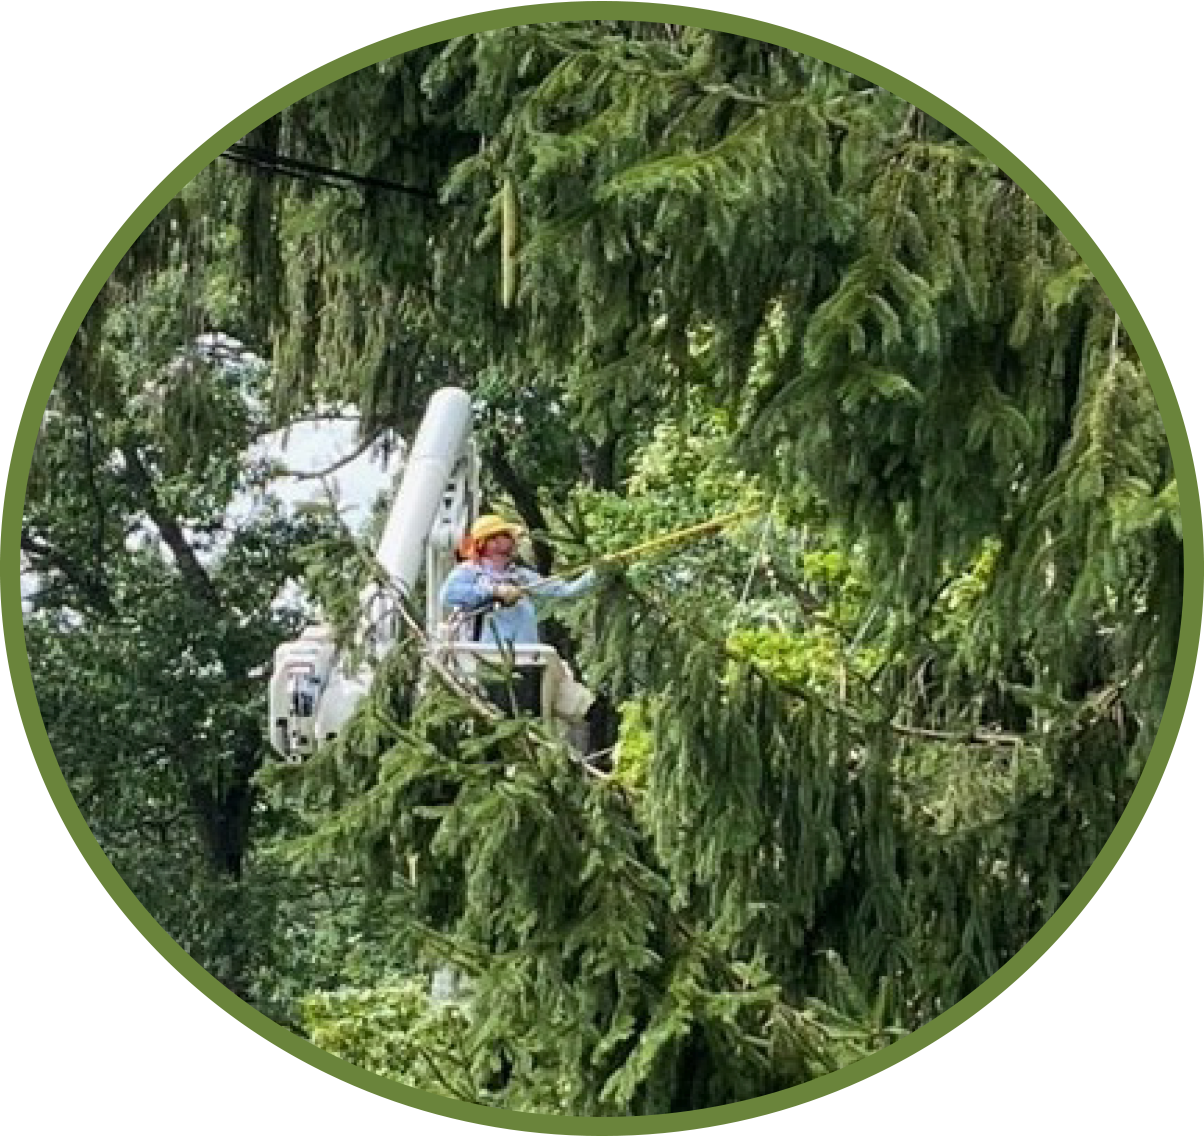 Pictured: A Sussex REC lineman in an aerial bucket, surrounded by branches, trims branches using a handheld tool